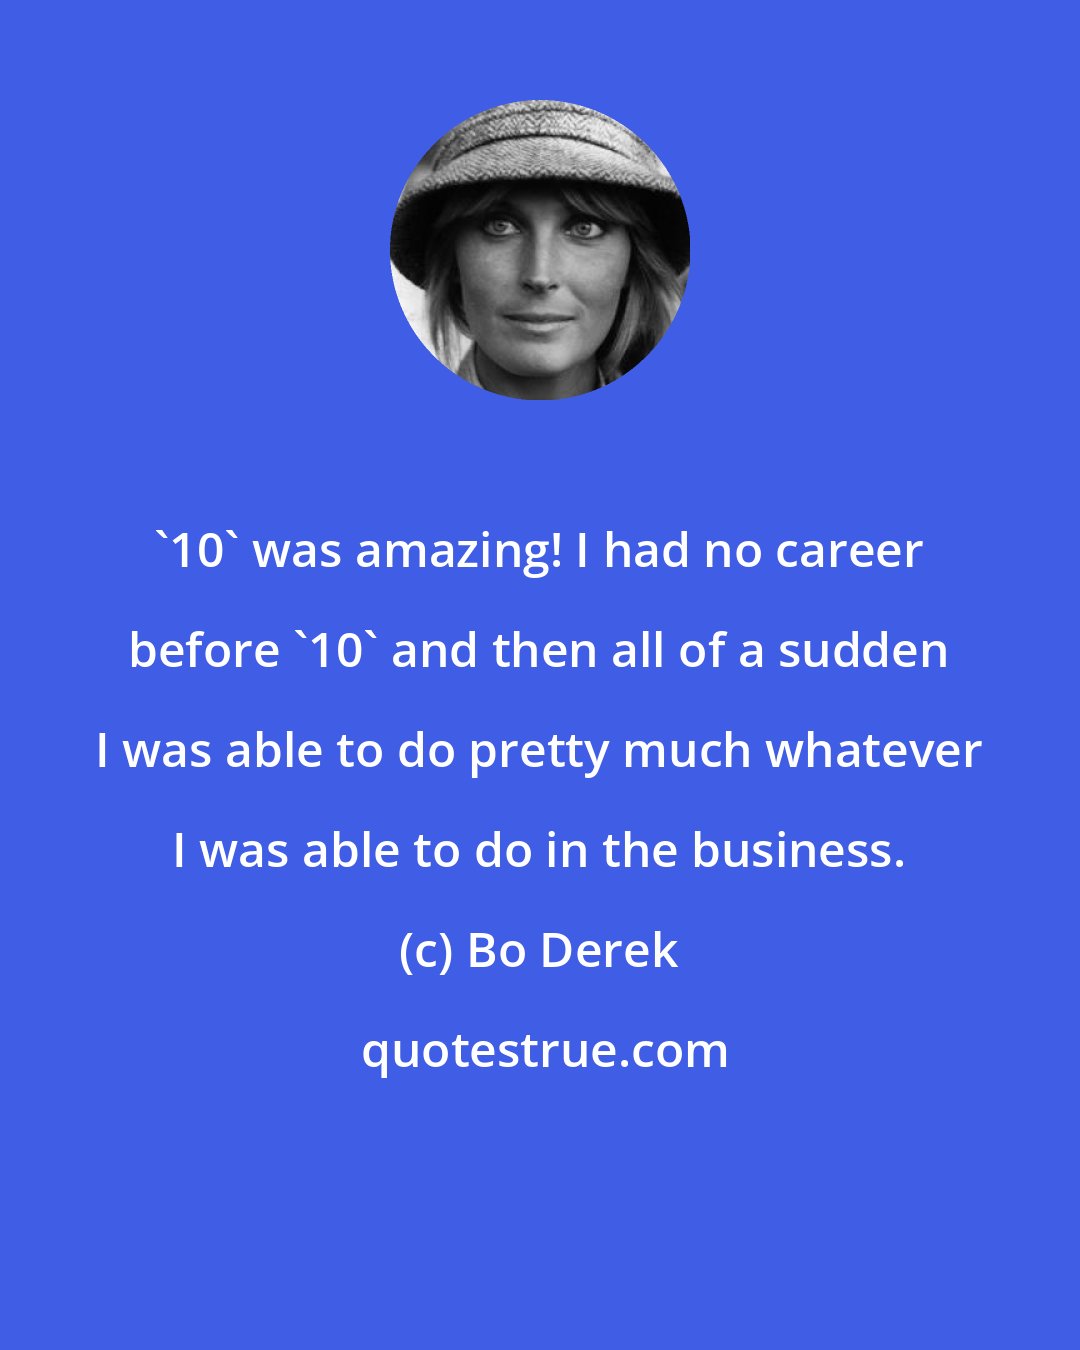 Bo Derek: '10' was amazing! I had no career before '10' and then all of a sudden I was able to do pretty much whatever I was able to do in the business.